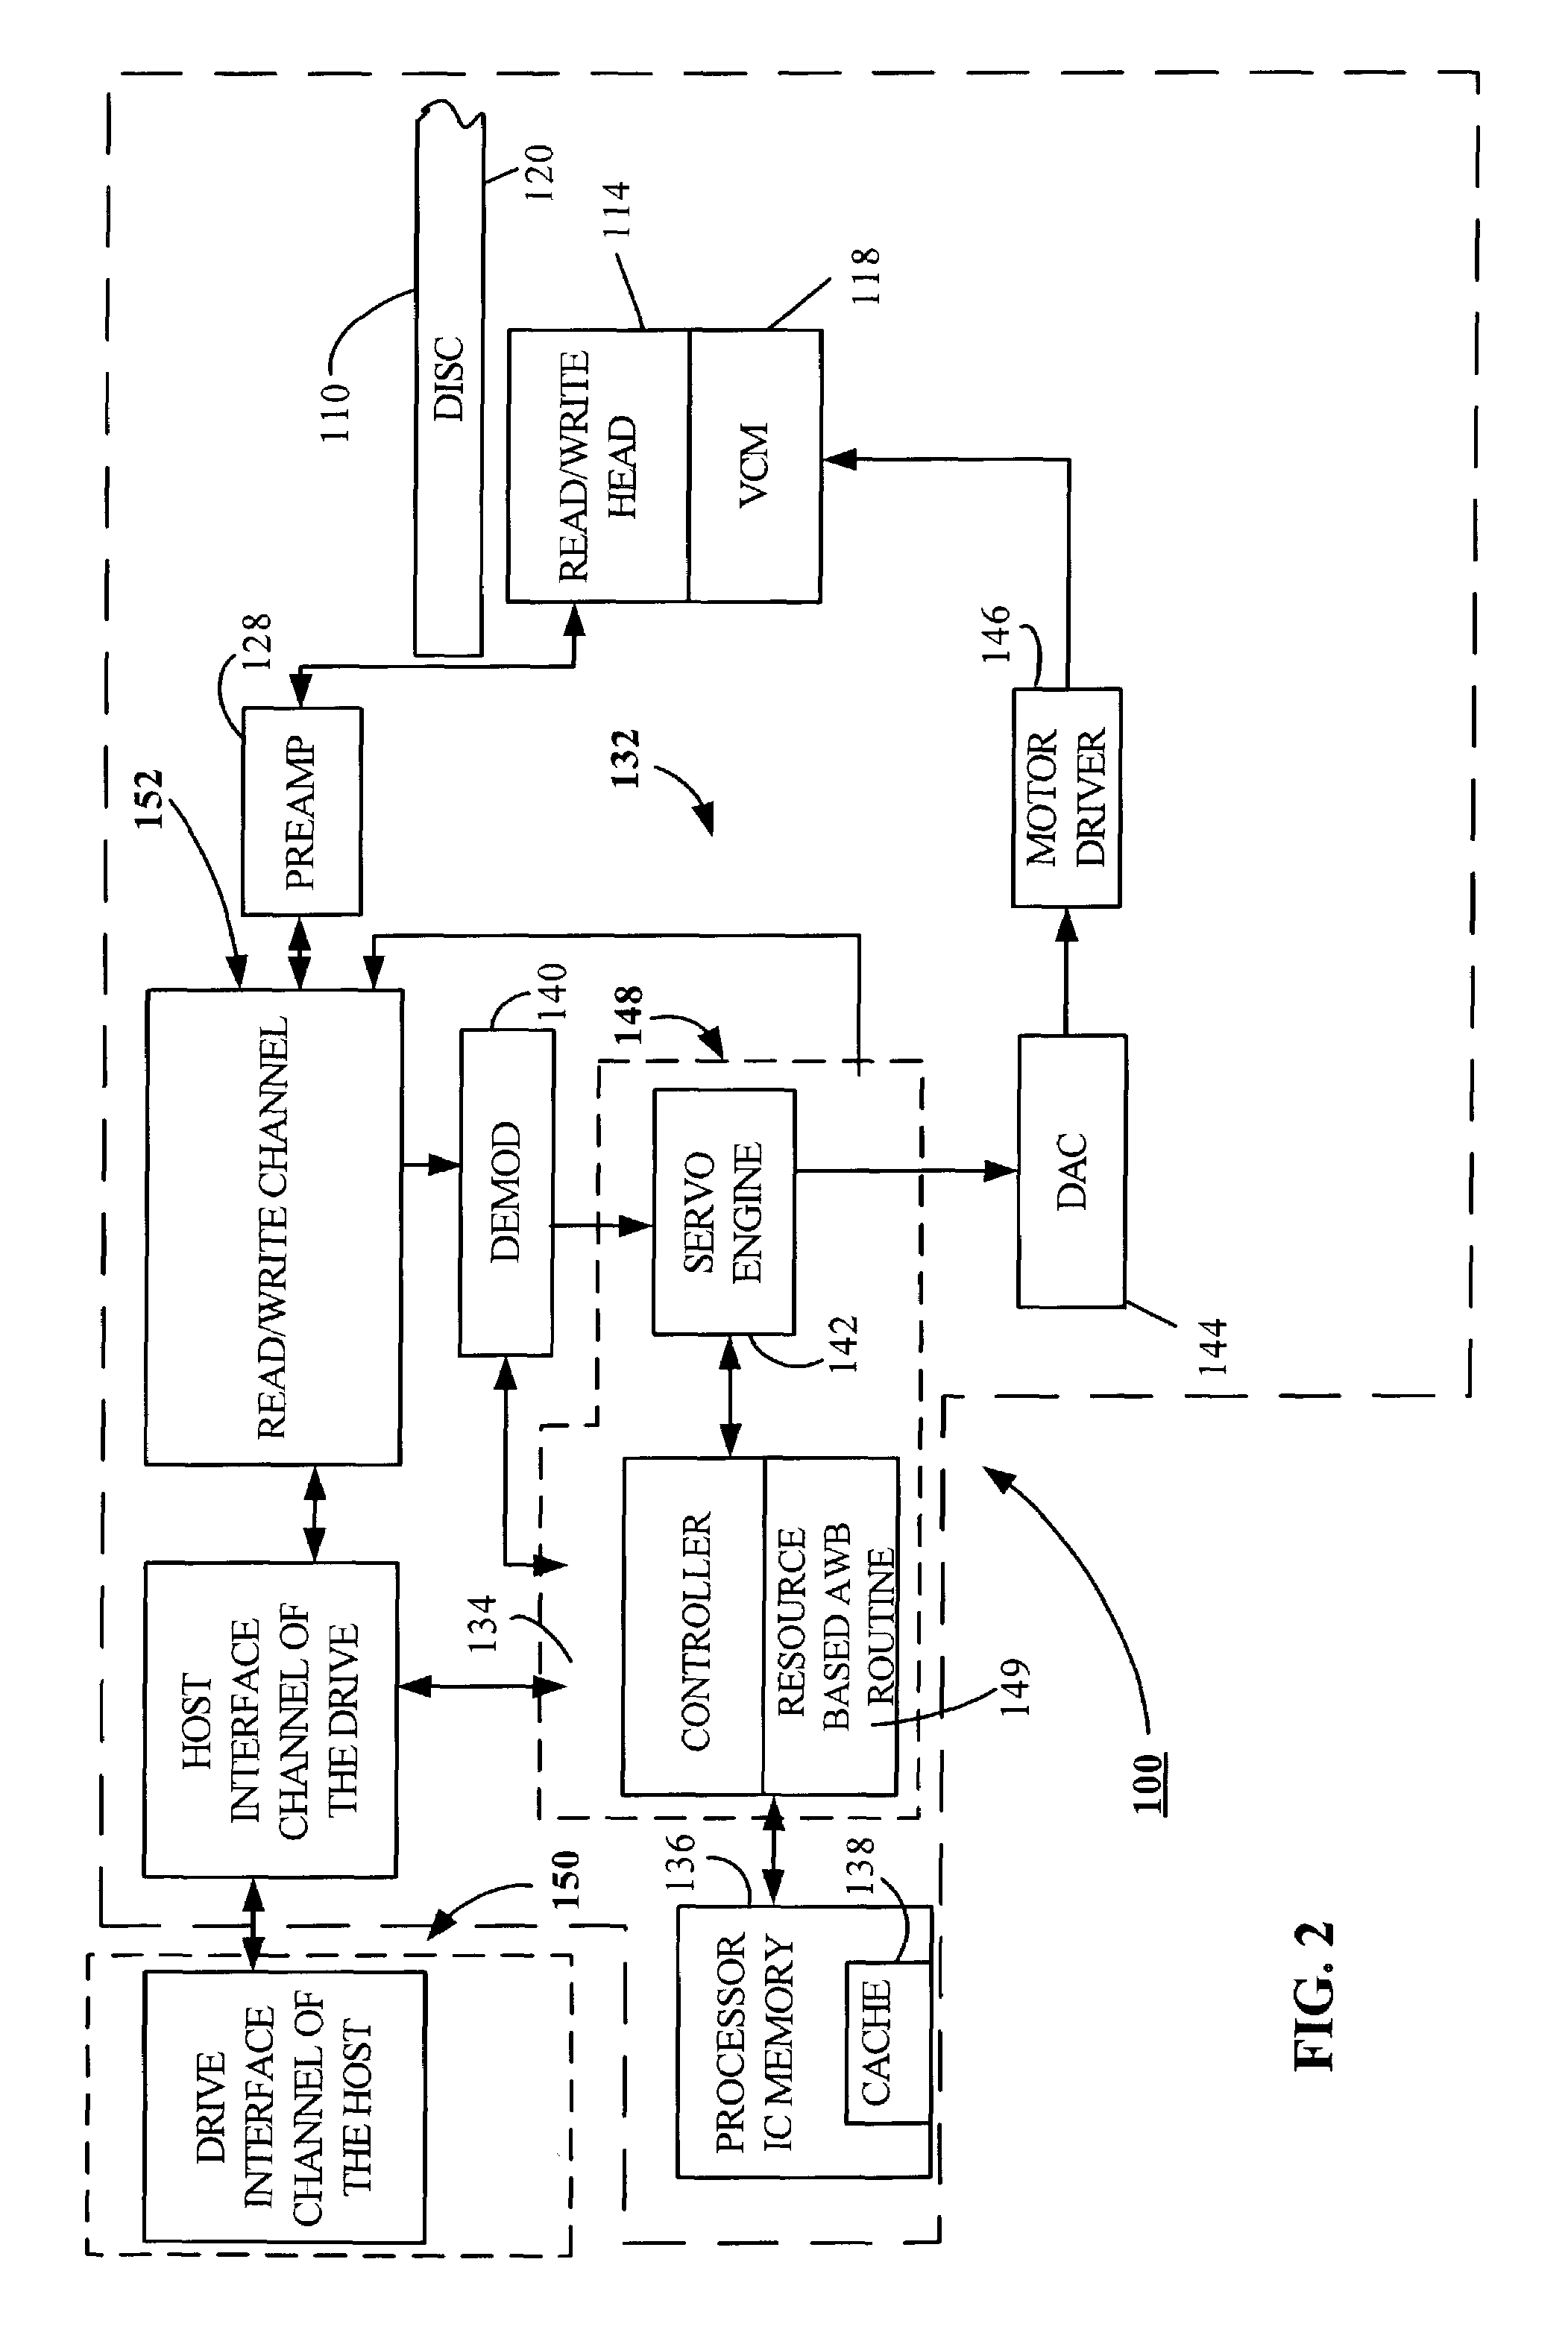 Adaptive resource controlled write-back aging for a data storage device